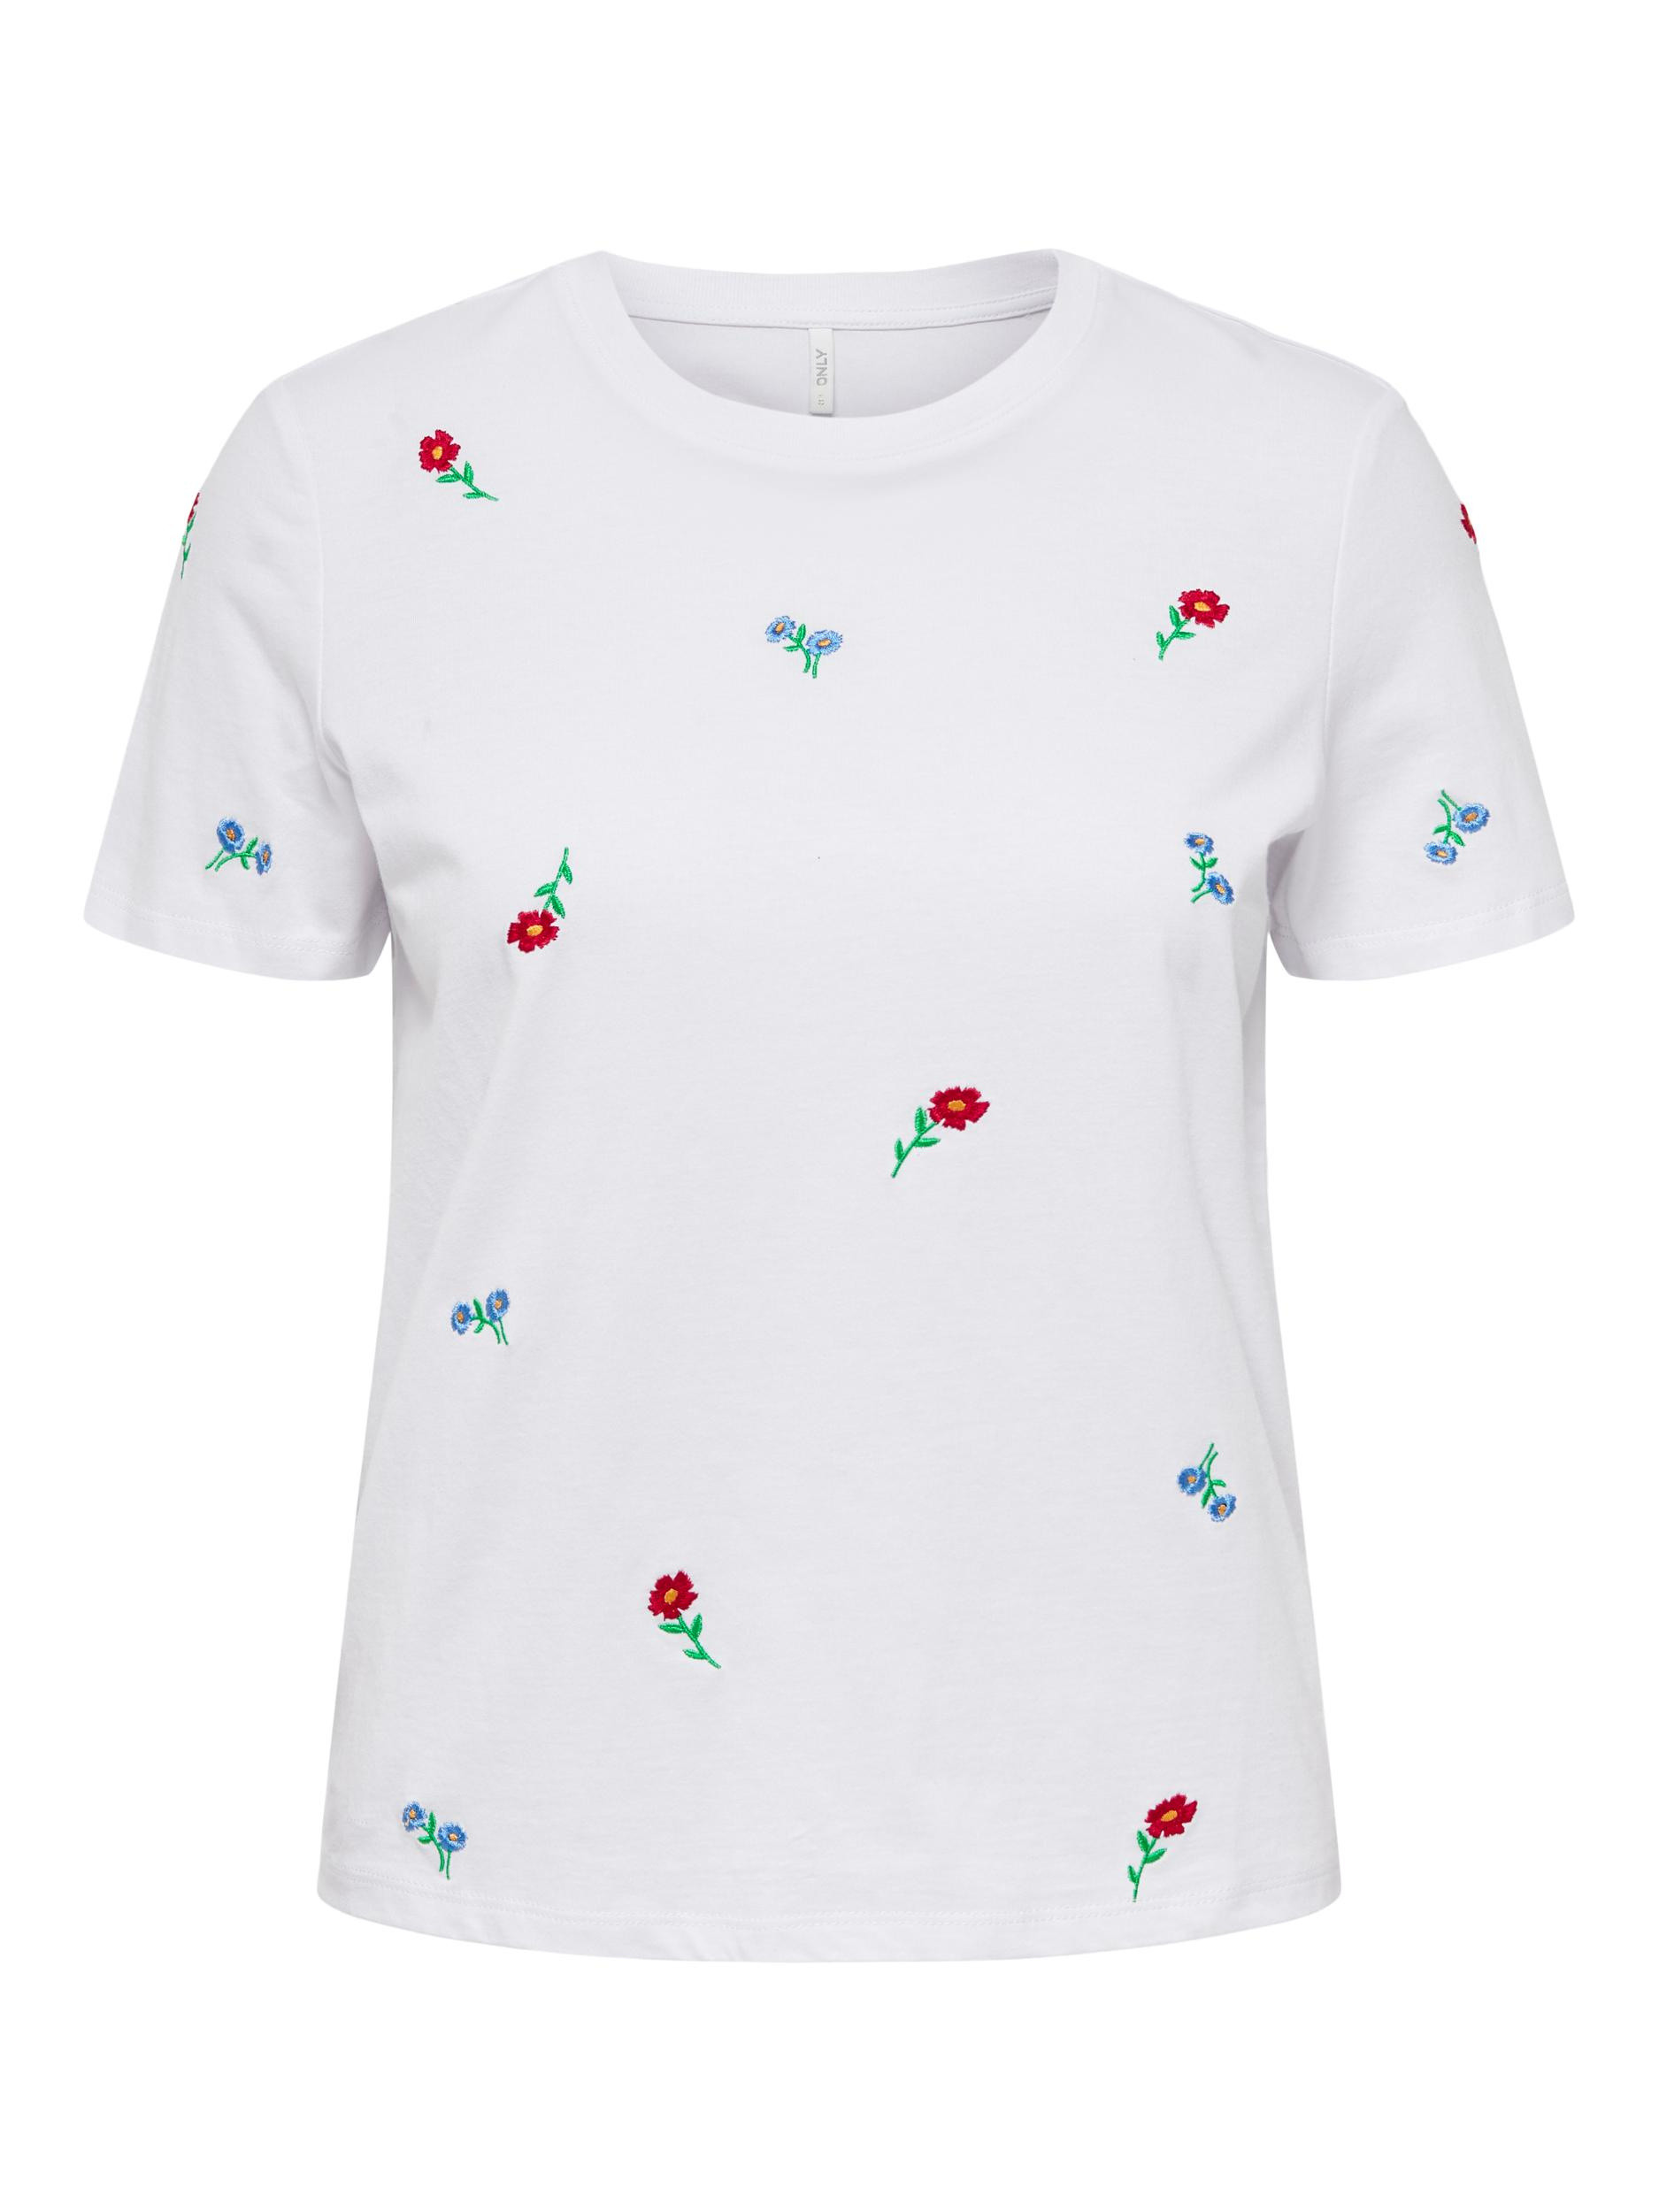 Only - Regular fit T-shirt with print, White 1, large image number 0